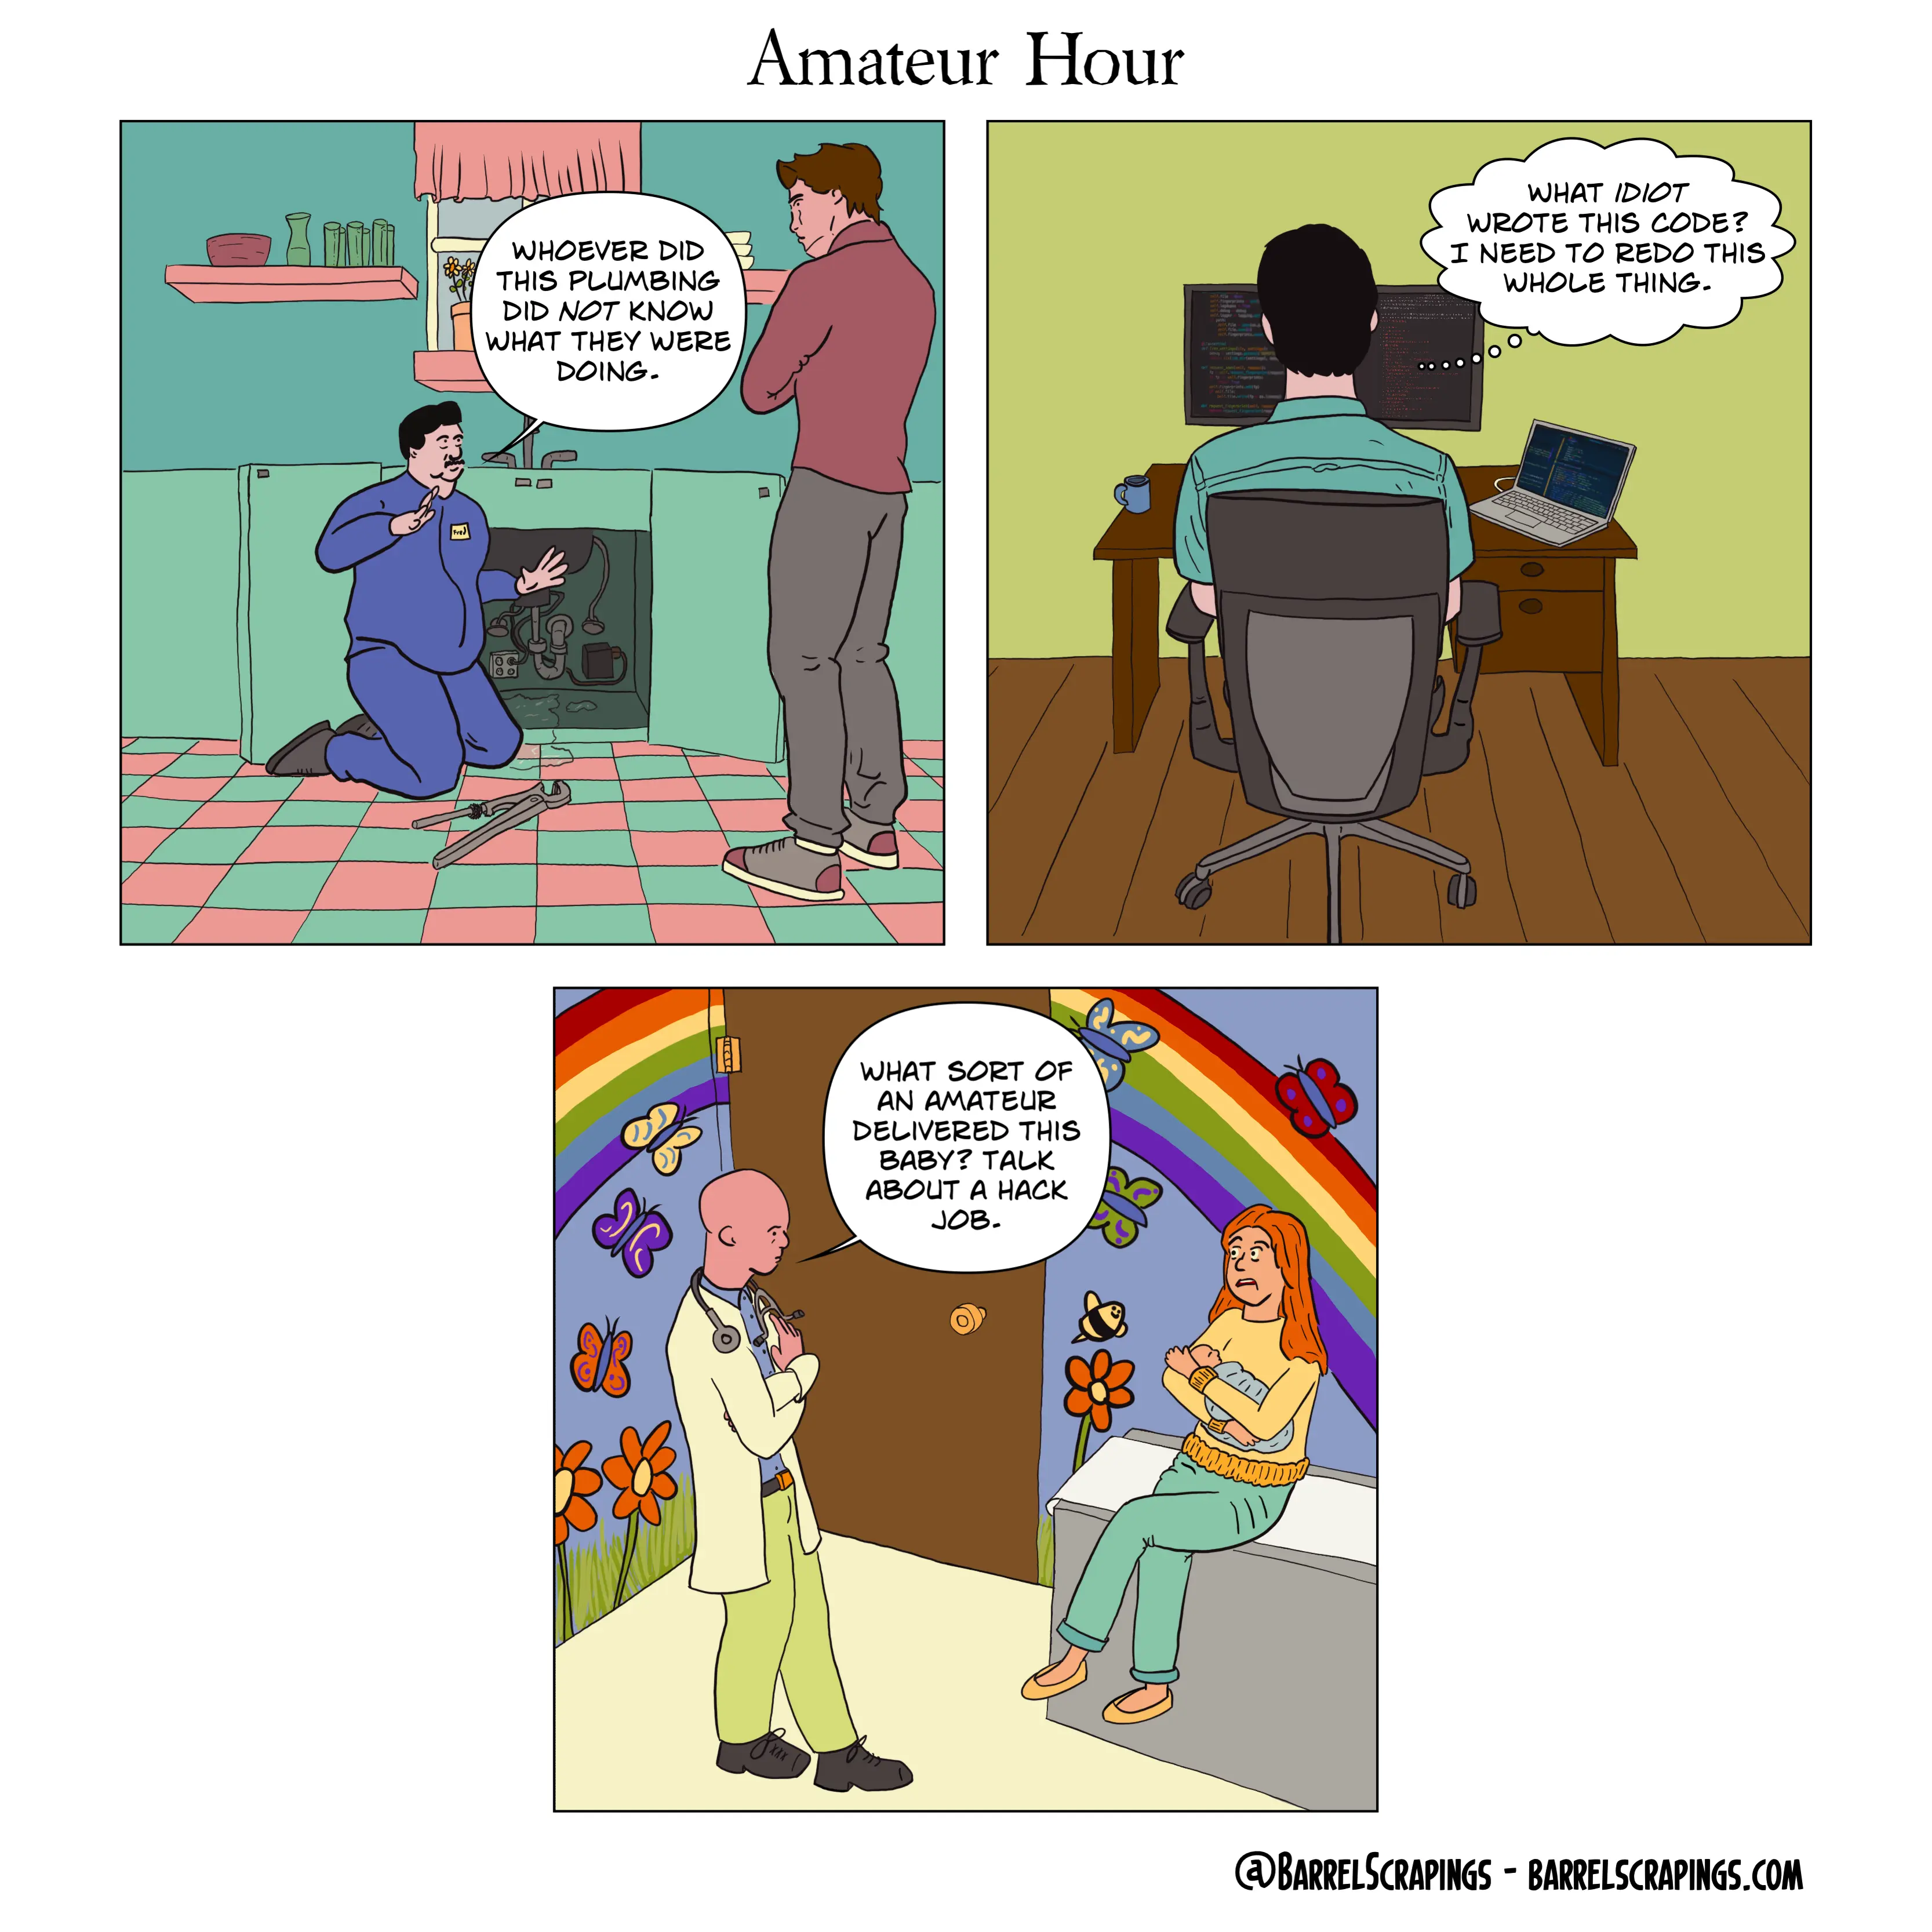 Three panels. Panel 1: A plumber is working on an open sink area, with exasperated hand gestures saying “Whoever did this plumbing did NOT know what they were doing.” Panel 2, a man is seated at a computer looking at code thinking “What IDIOT wrote this code? I need to redo the whole thing”. Panel 3: In a colorful pediatrician’s office, a doctor with arms crossed says to a woman holding her baby: “What sort of amateur delivered this baby? Talk about a hack job”